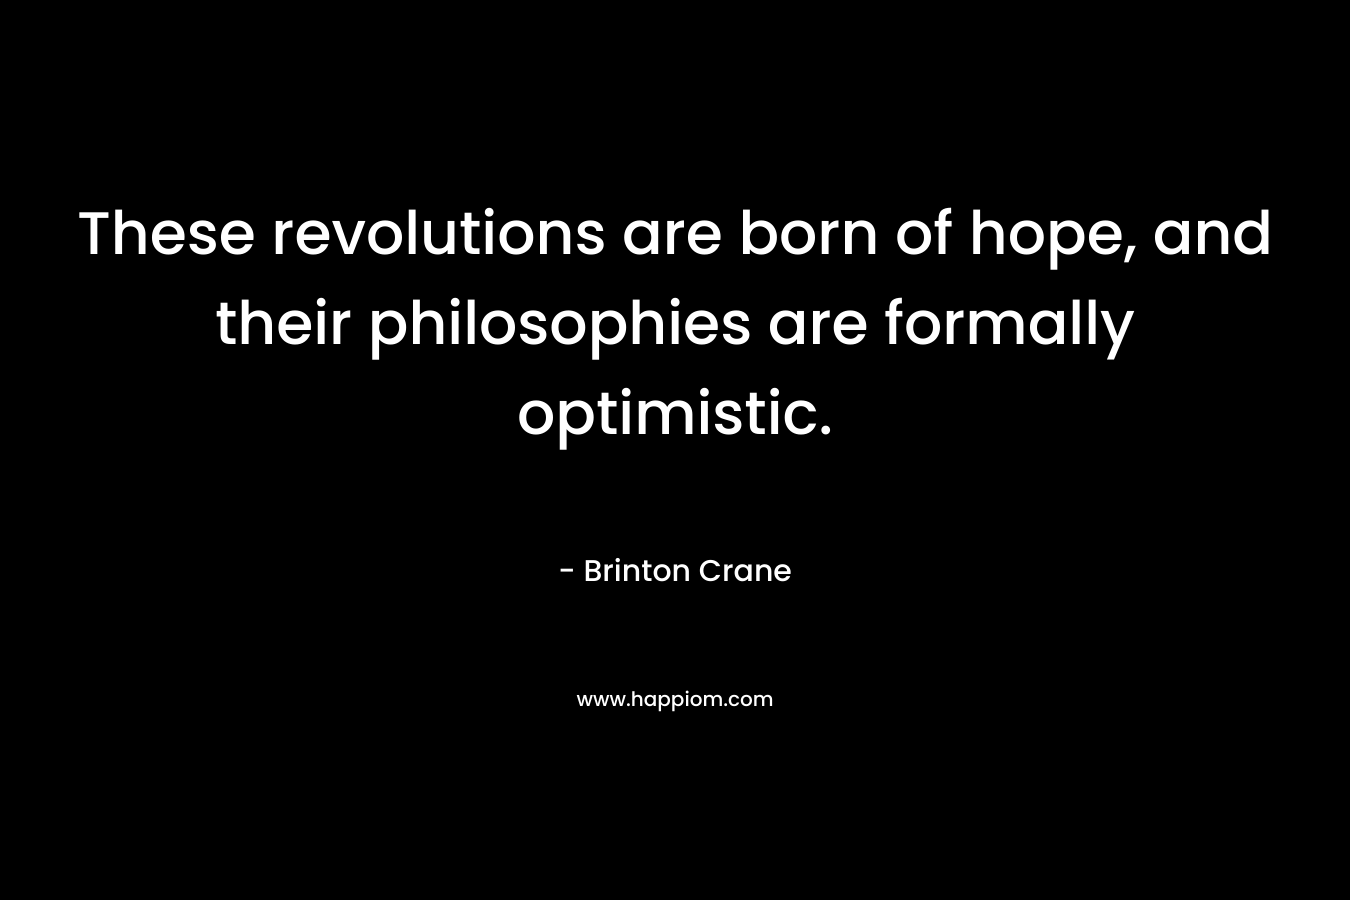 These revolutions are born of hope, and their philosophies are formally optimistic. – Brinton Crane